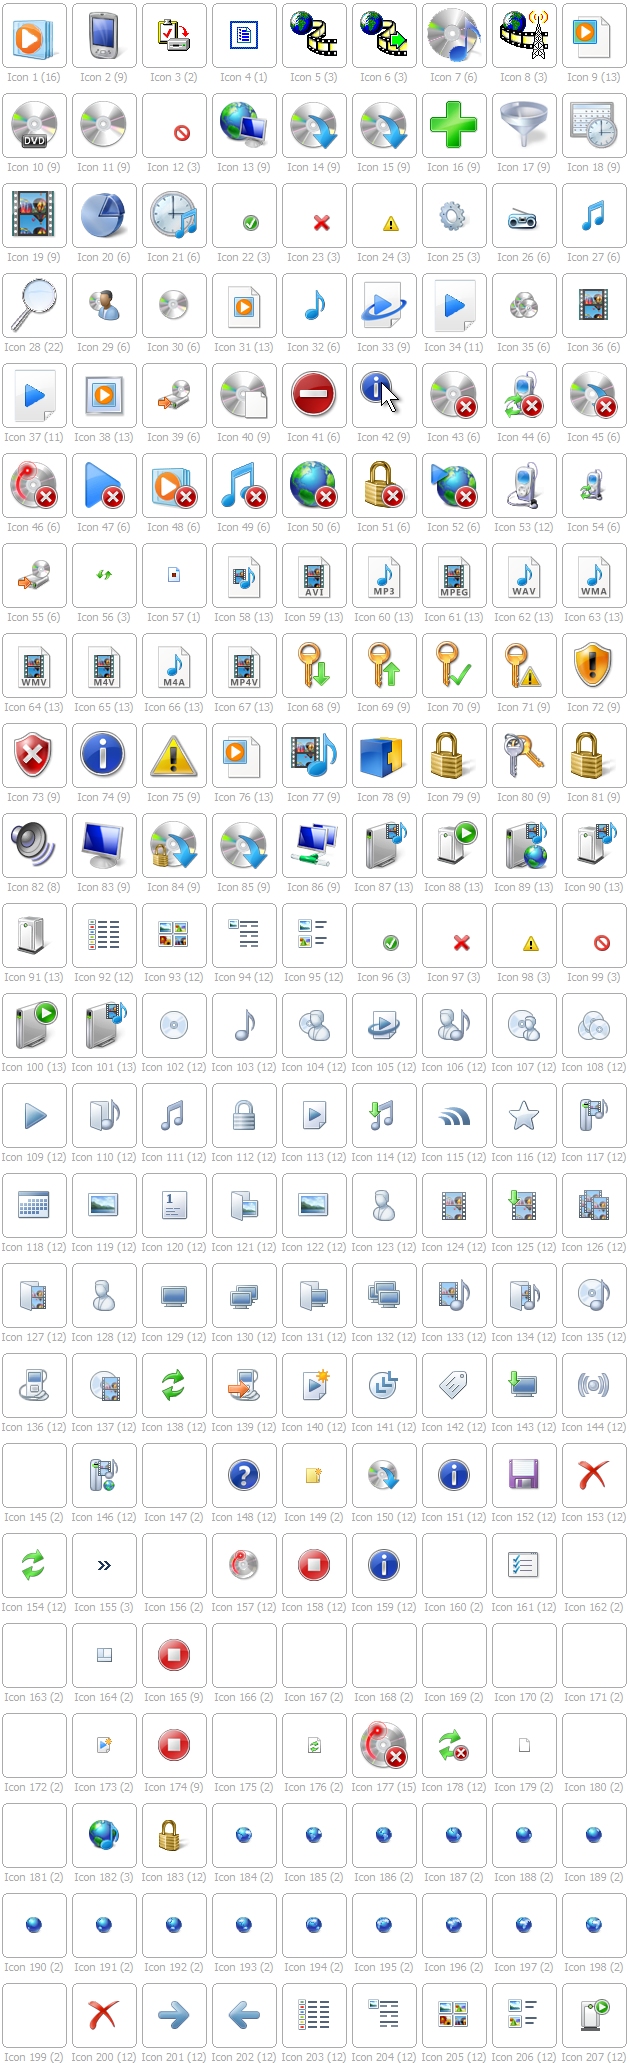 WINDOWS 10 BUILD 10056 ICON PACK | IMAGERES.DLL by GTAGAME on 